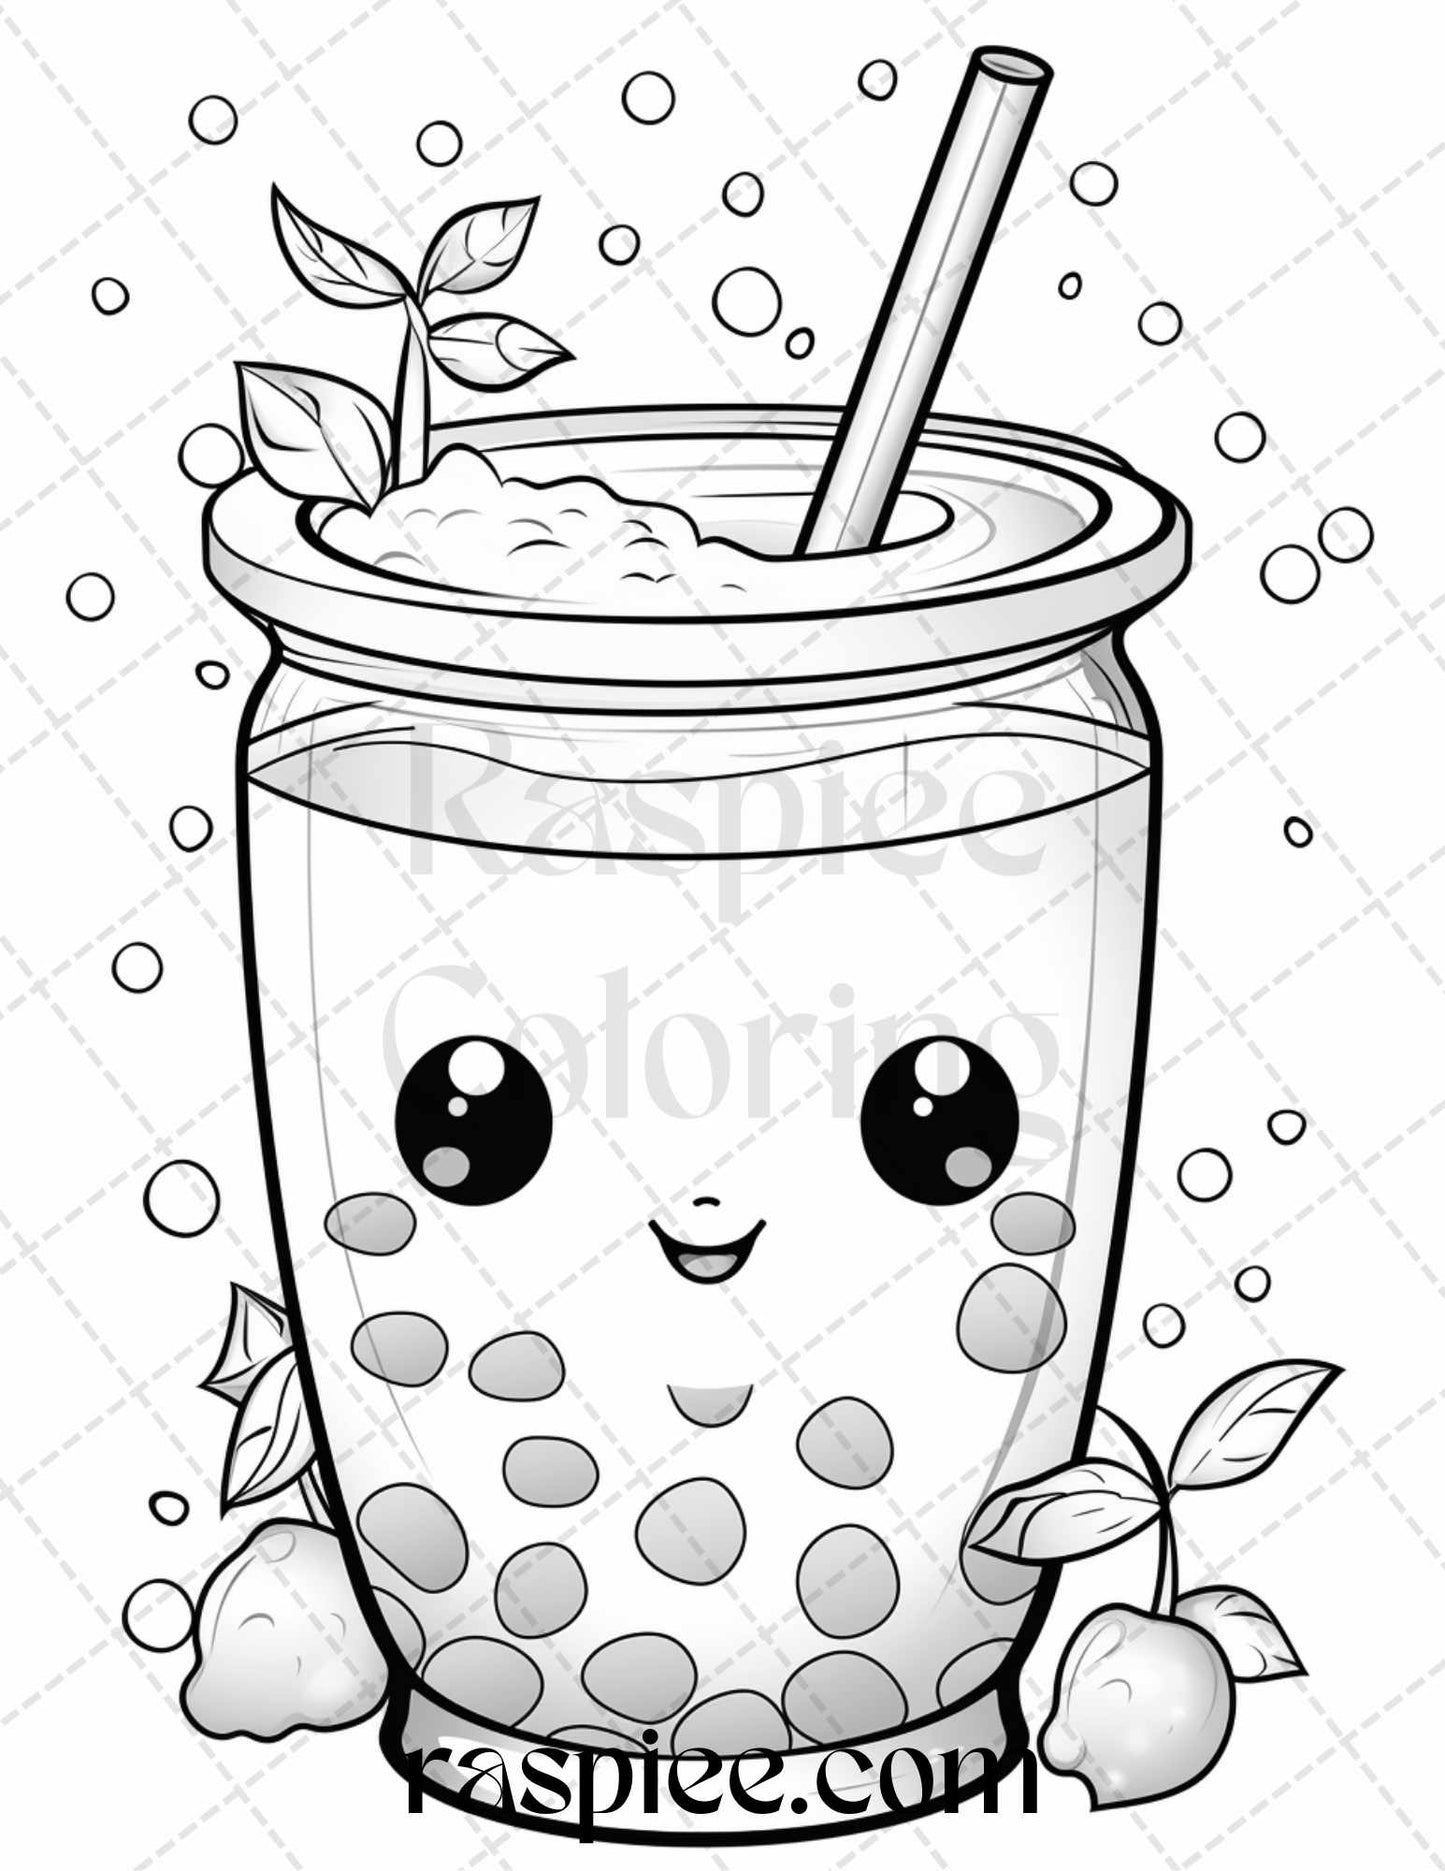 50 Cute Kawaii Boba Tea Grayscale Coloring Pages for Adults and Kids, Printable PDF File Instant Download